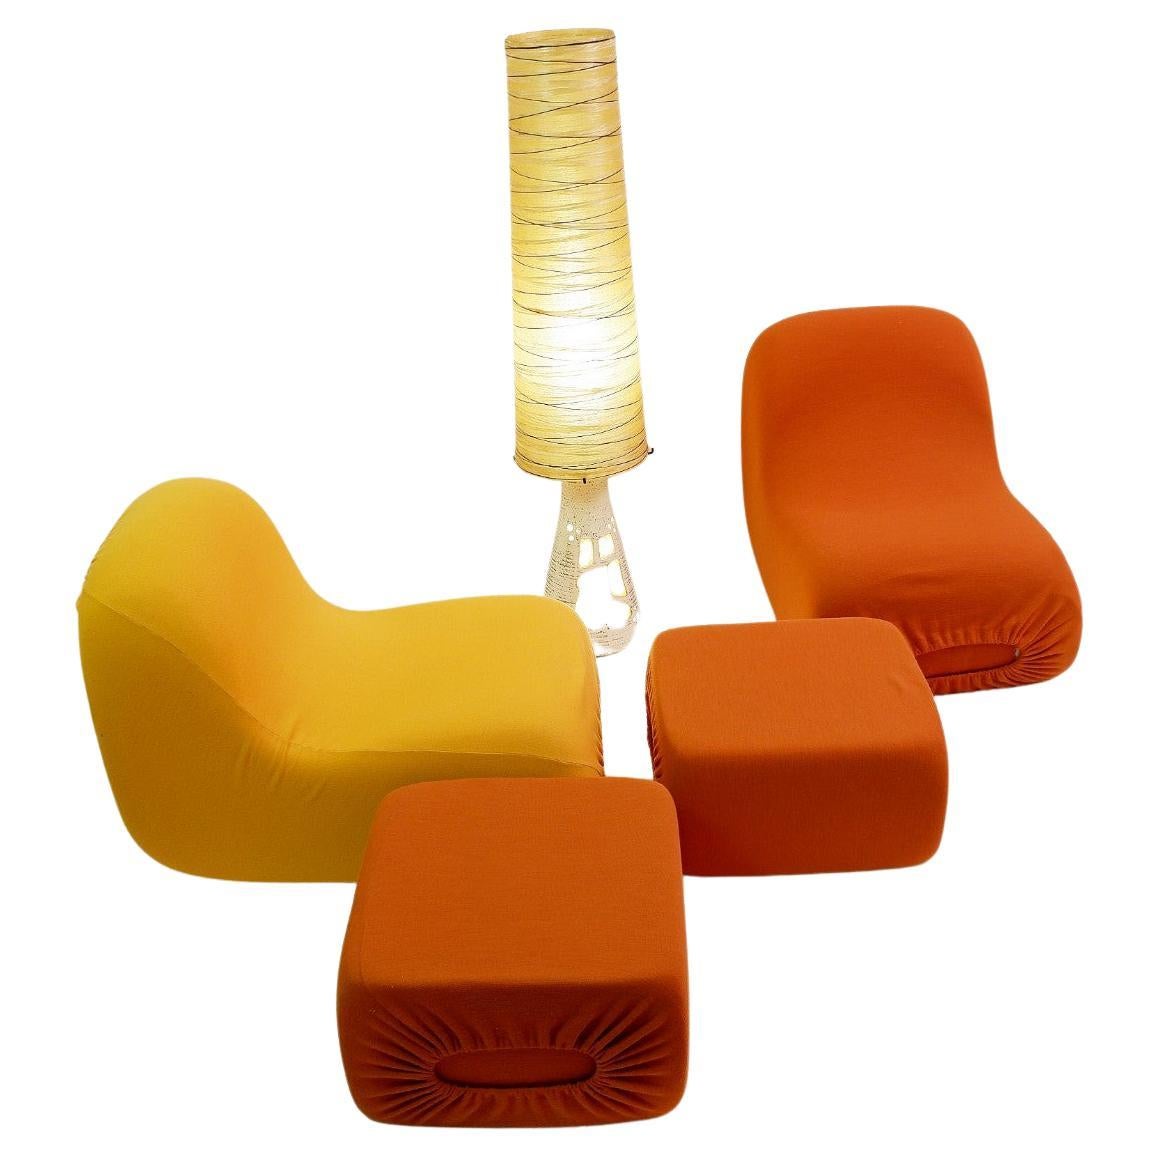 "Canapouf" by Pierre Cardin, Seating Set of 4 For Sale